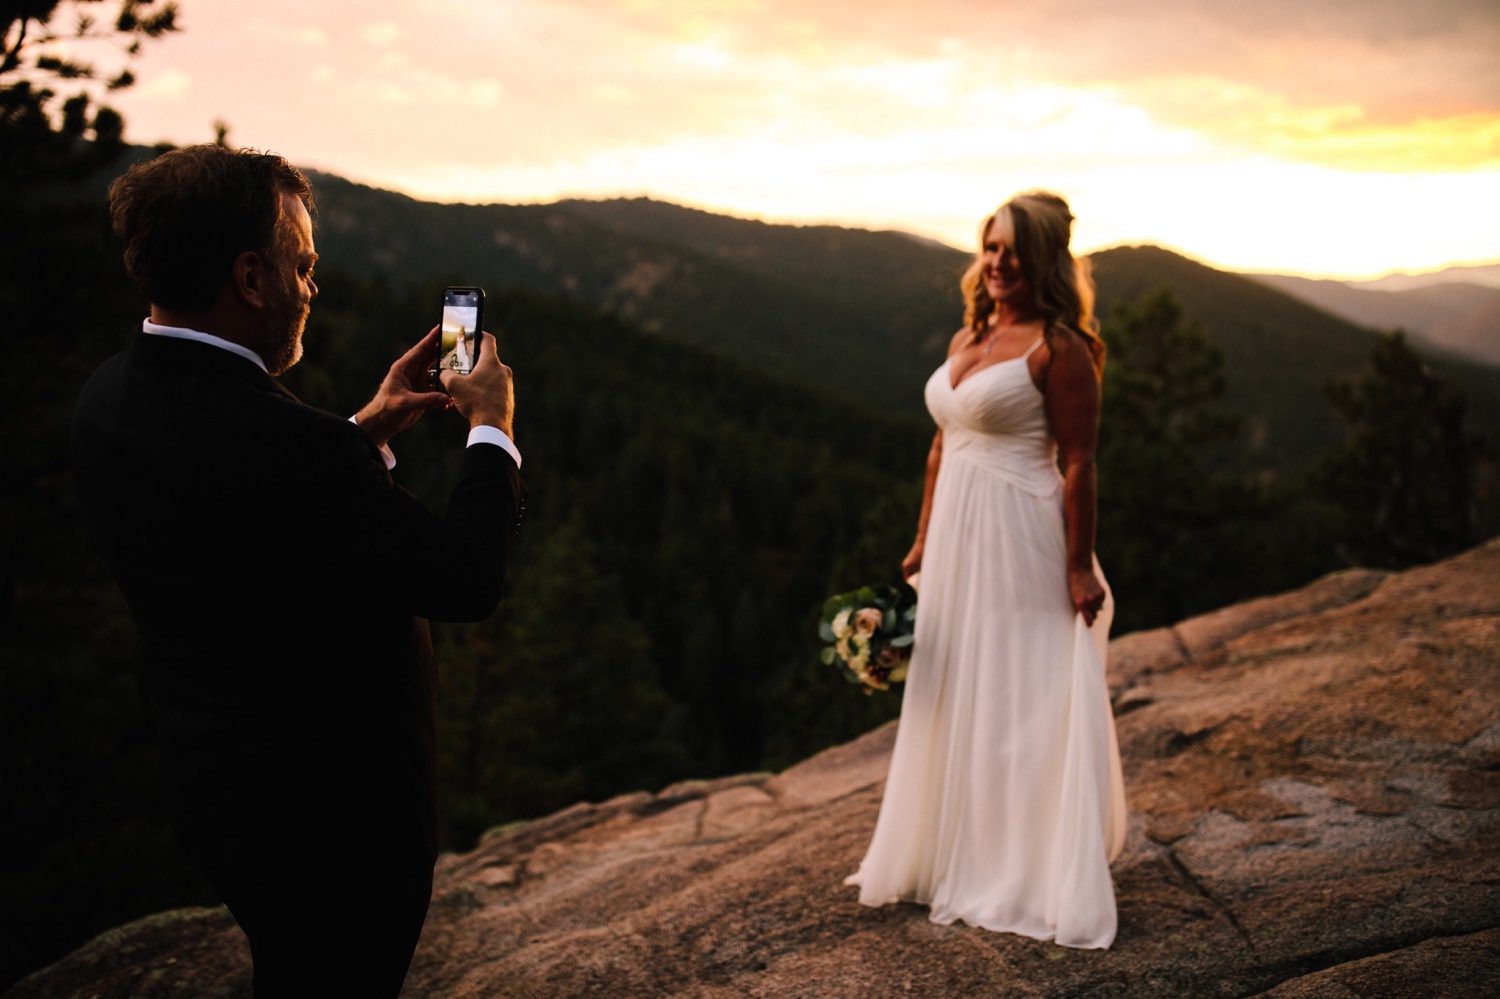 Groom taking a photo of his bride at sunset